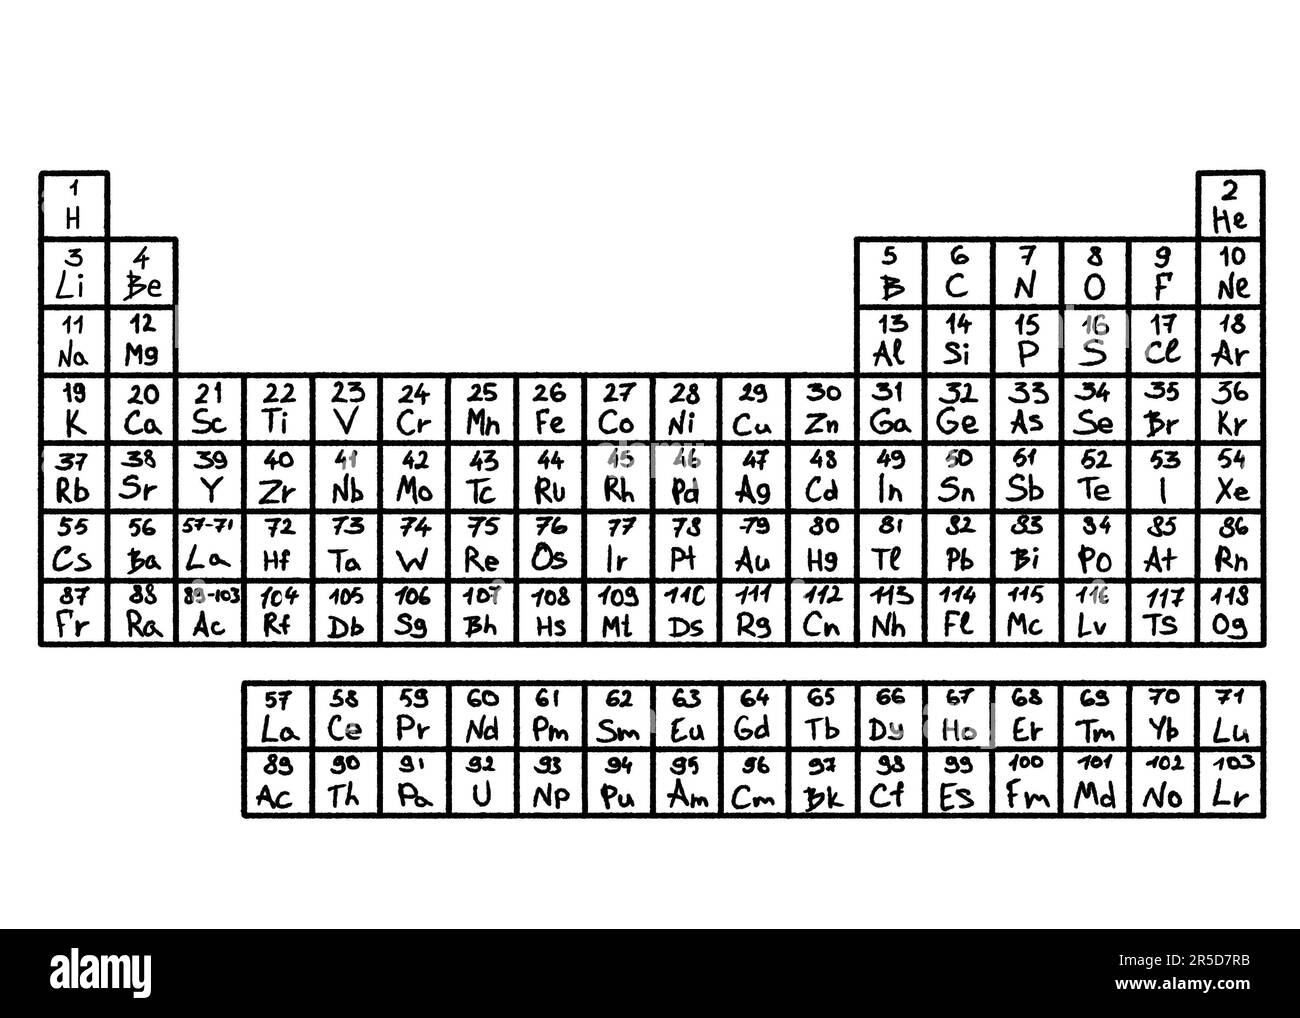 Periodic table of elements on white background Stock Photo